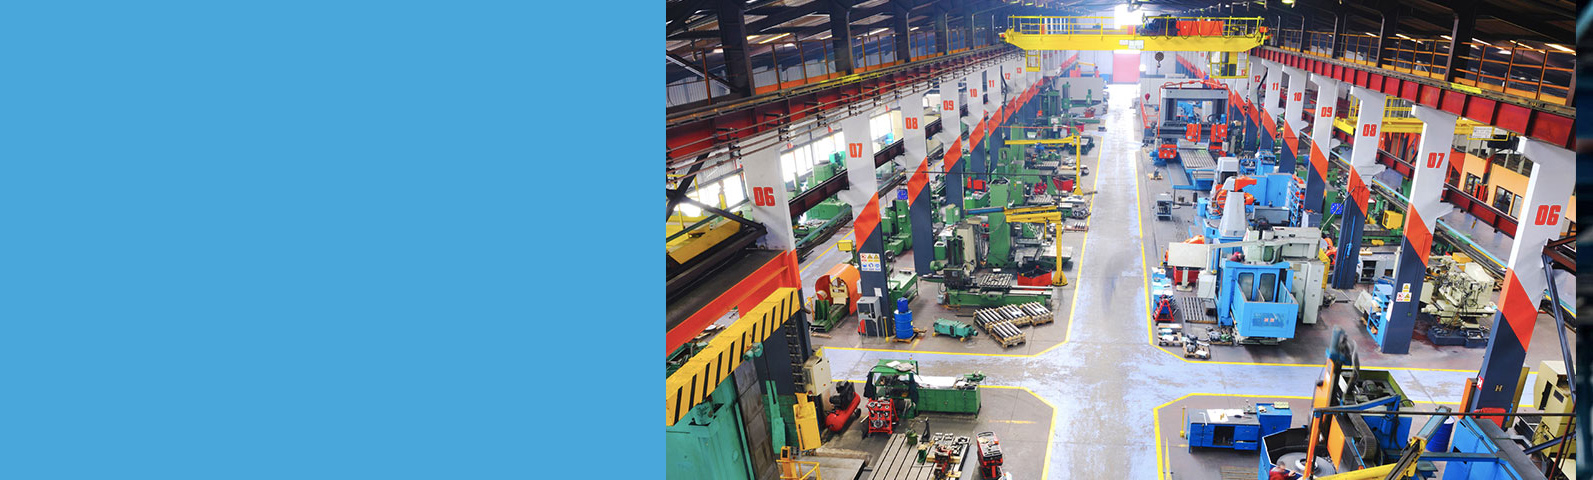 Assembly of Industrial Equipment in Mexico